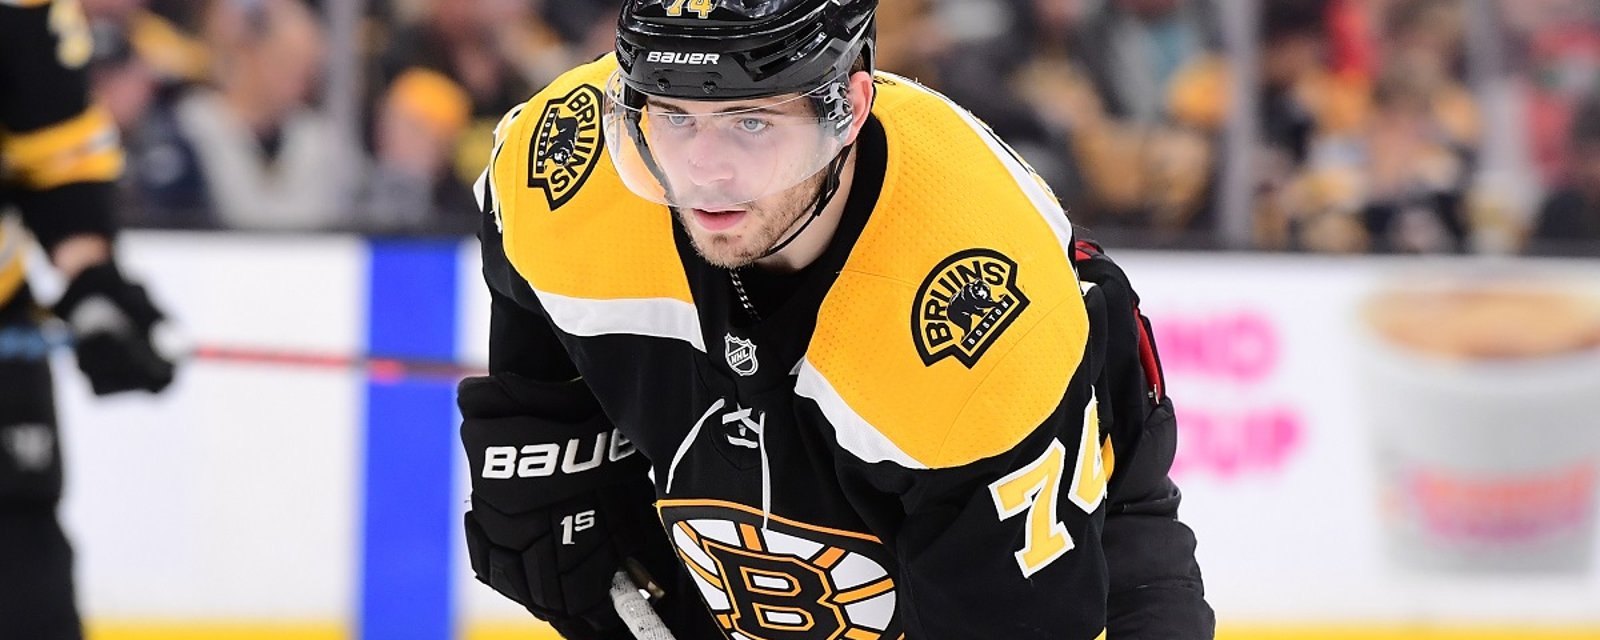 Breaking: DeBrusk absent from the Bruins morning practice.